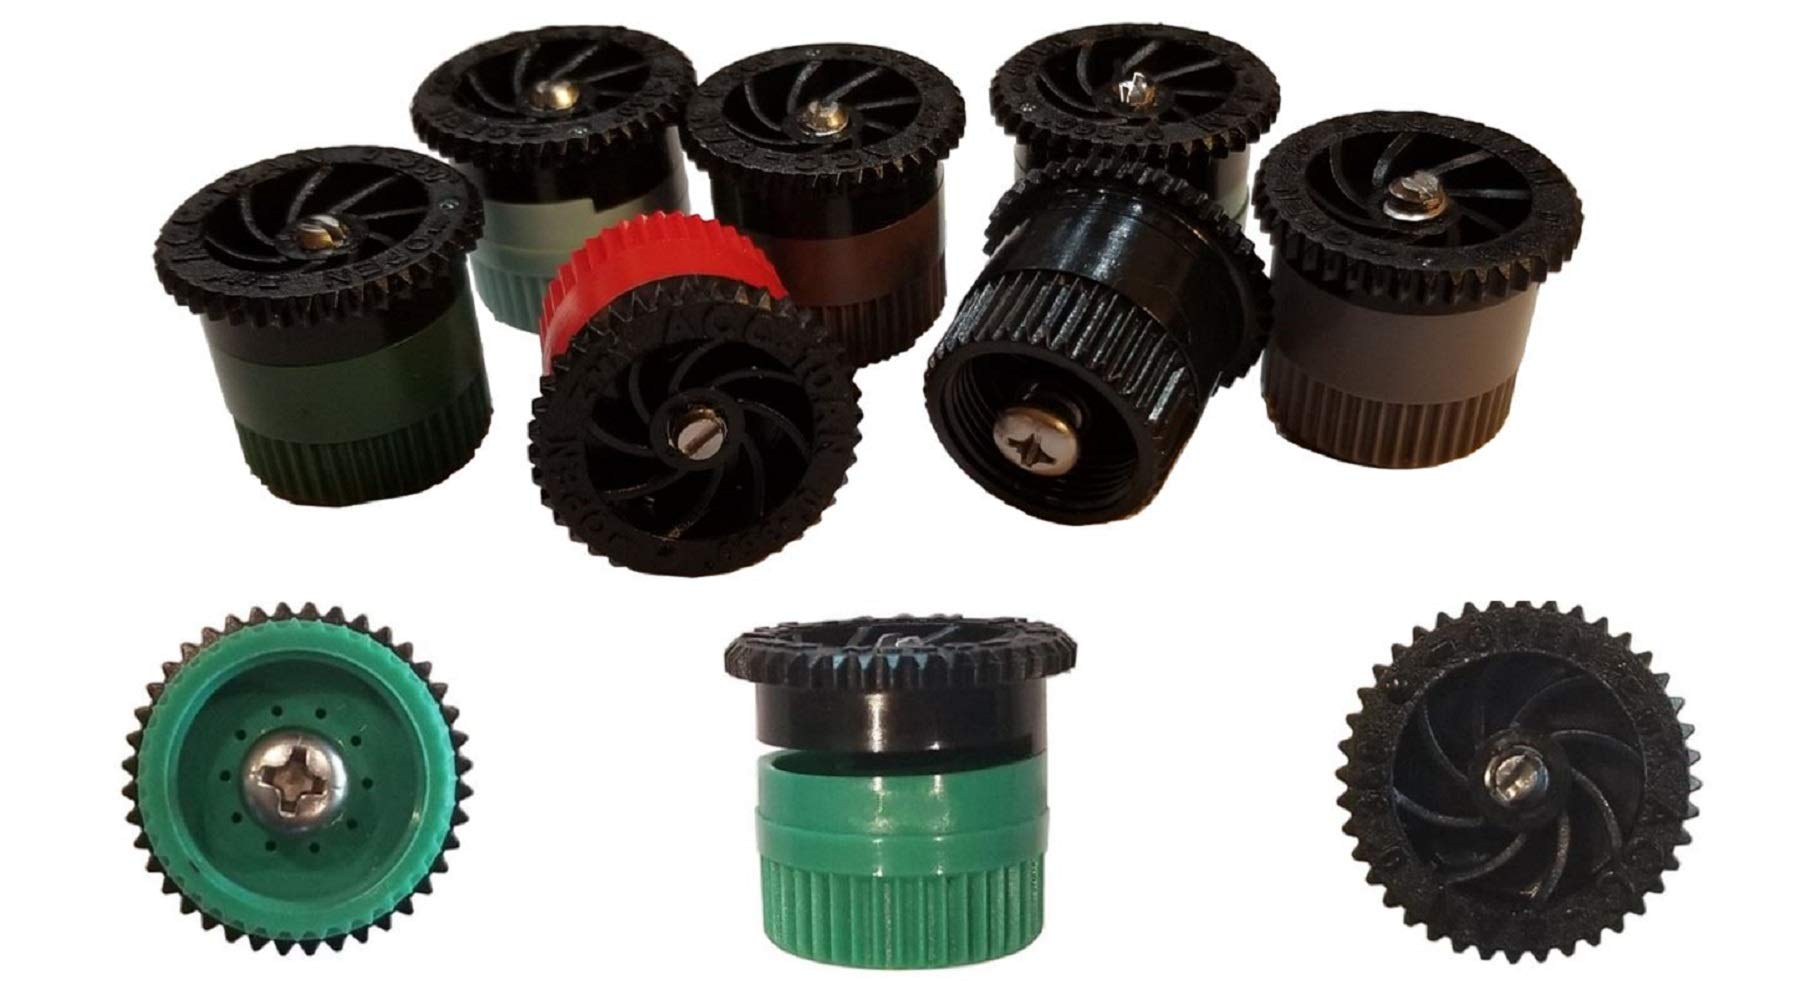 Modtek Replacement Pop Up Sprinkler Heads For Rainbird, Hunter, Orbit Pop Up Sprinklers, Sprinkler Color May Vary (10, 6An)